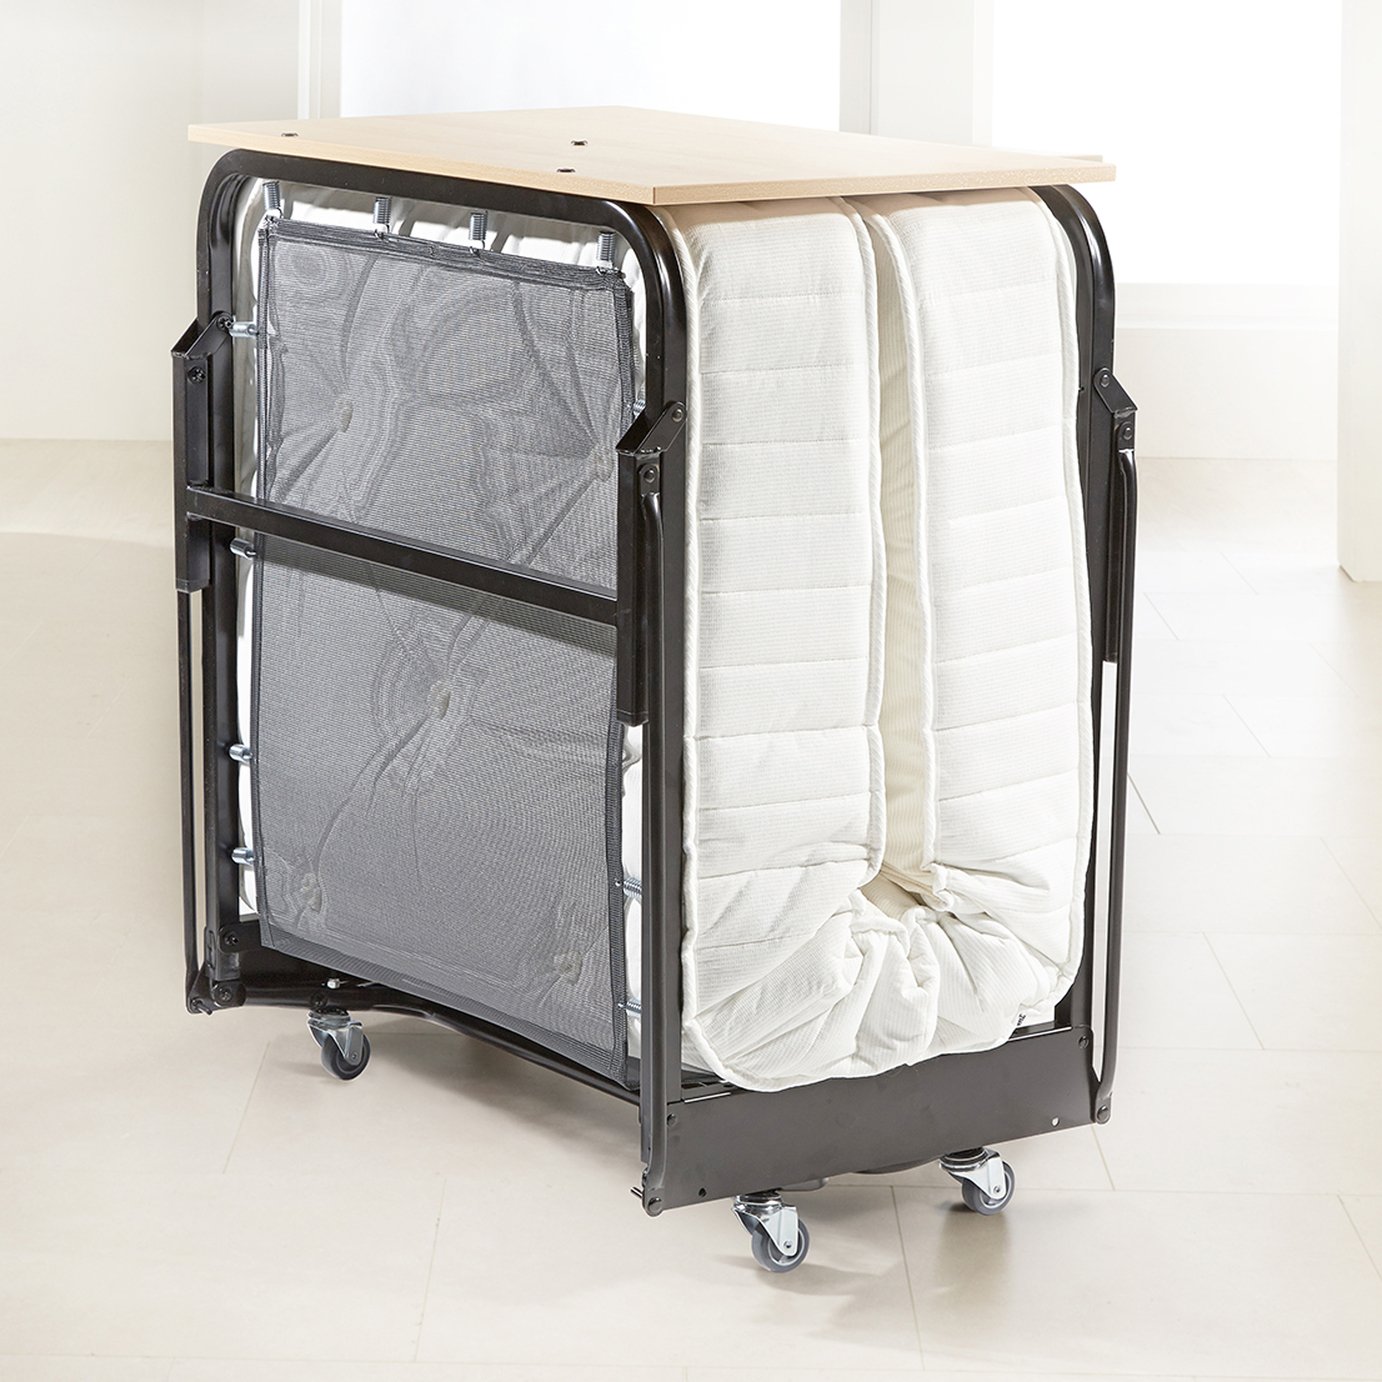 Jay-Be Deep Spring Folding Guest Bed Review